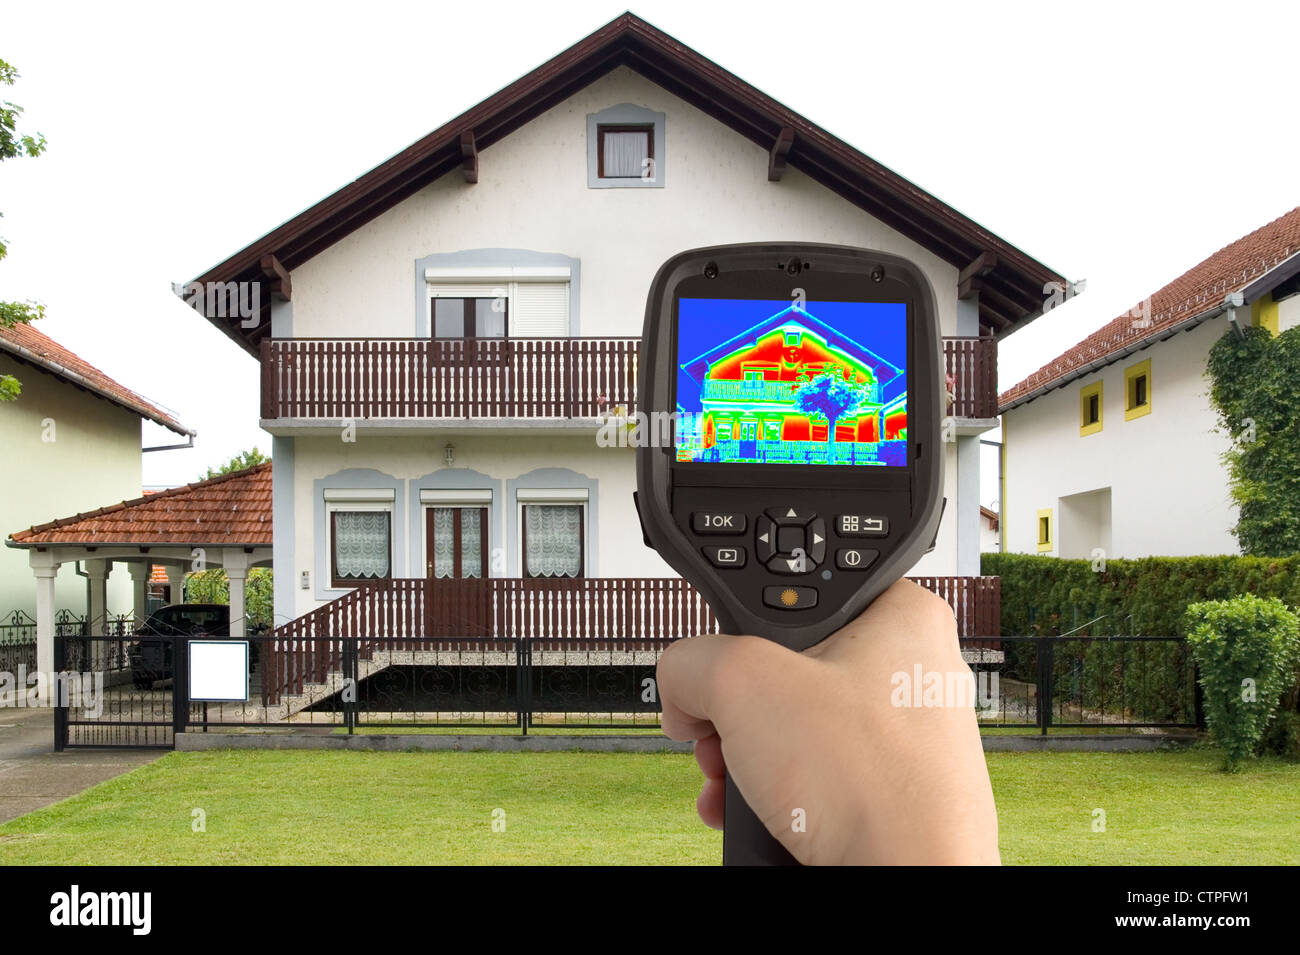 Detecting Heat Loss at the House With Infrared Thermal Camera Stock Photo